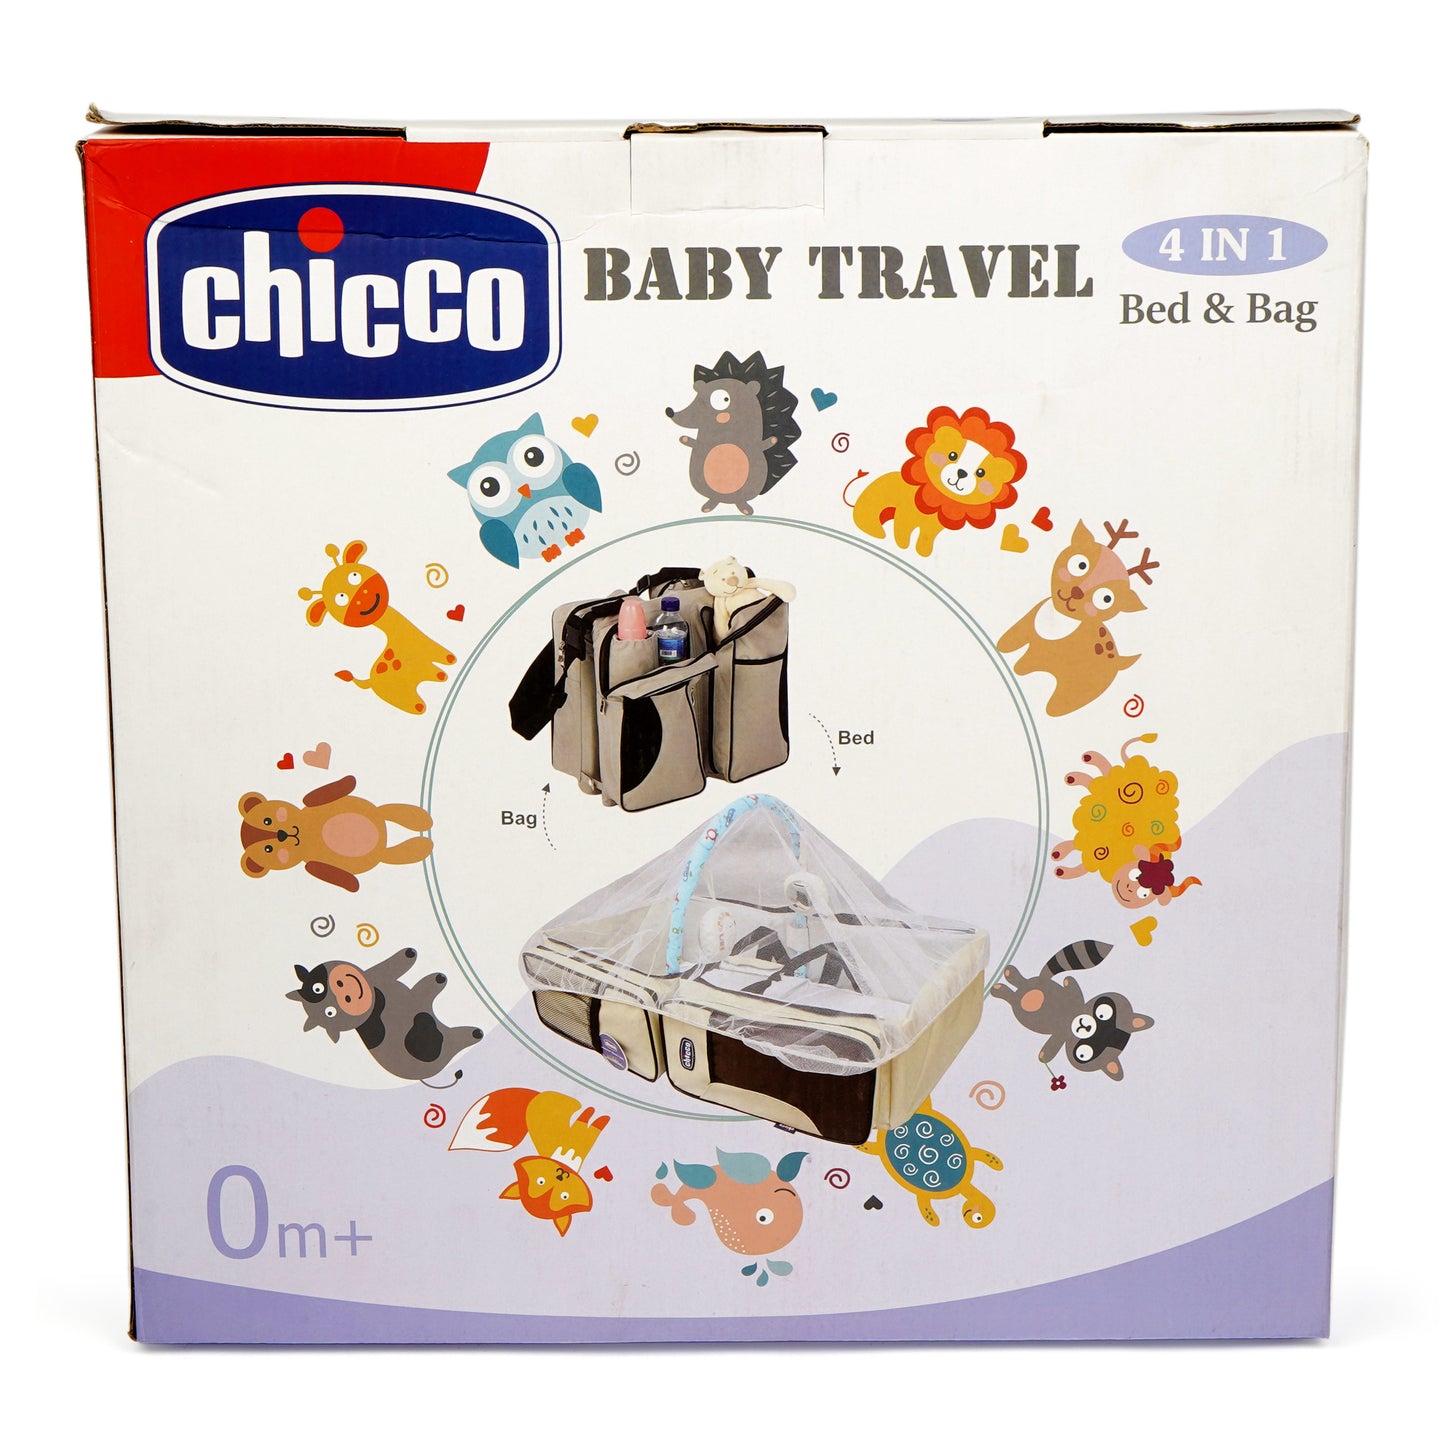 Chicco Baby Travel Bag & Bed